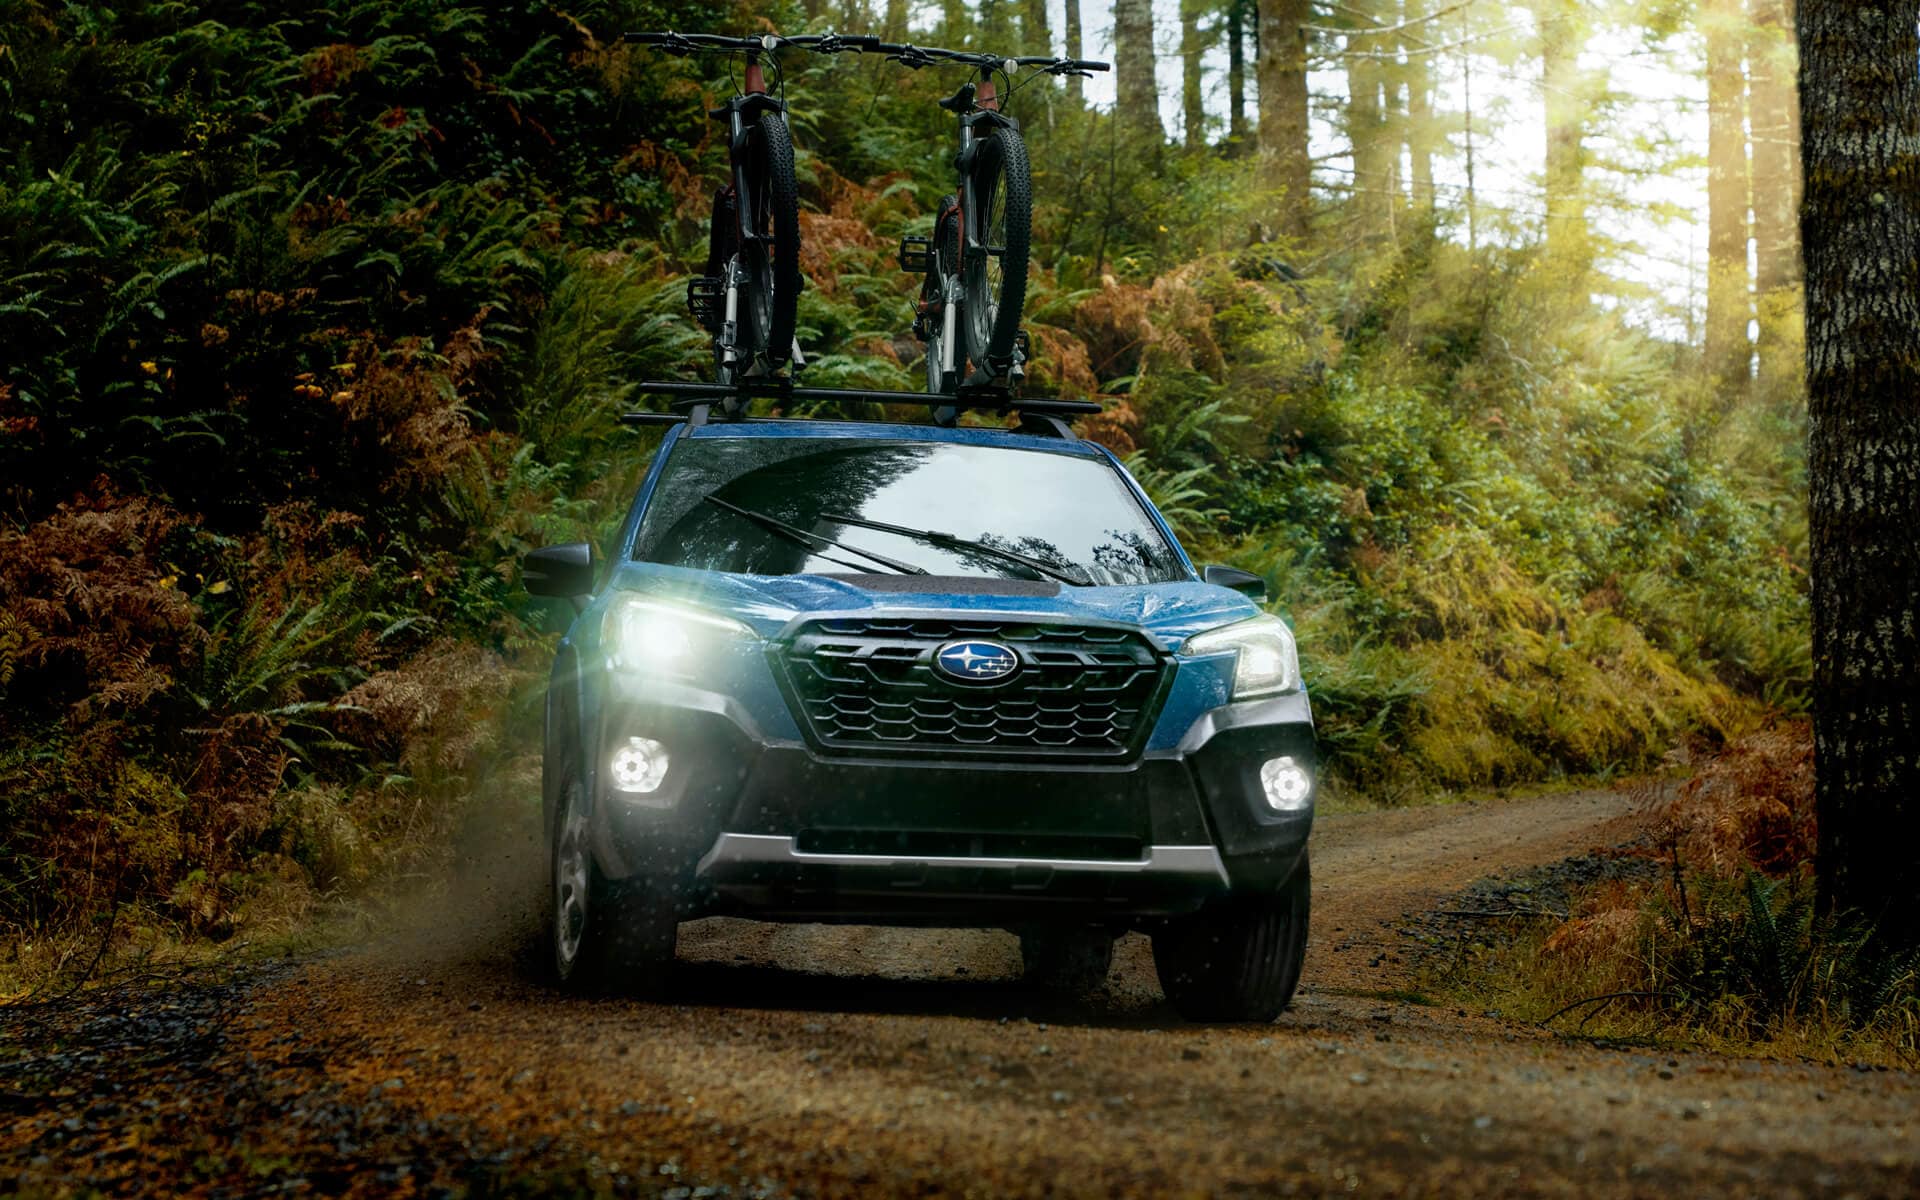 The 2022 Subaru Forester Wilderness driving down a winding forester road, with mountain bike mounted on the roof racks